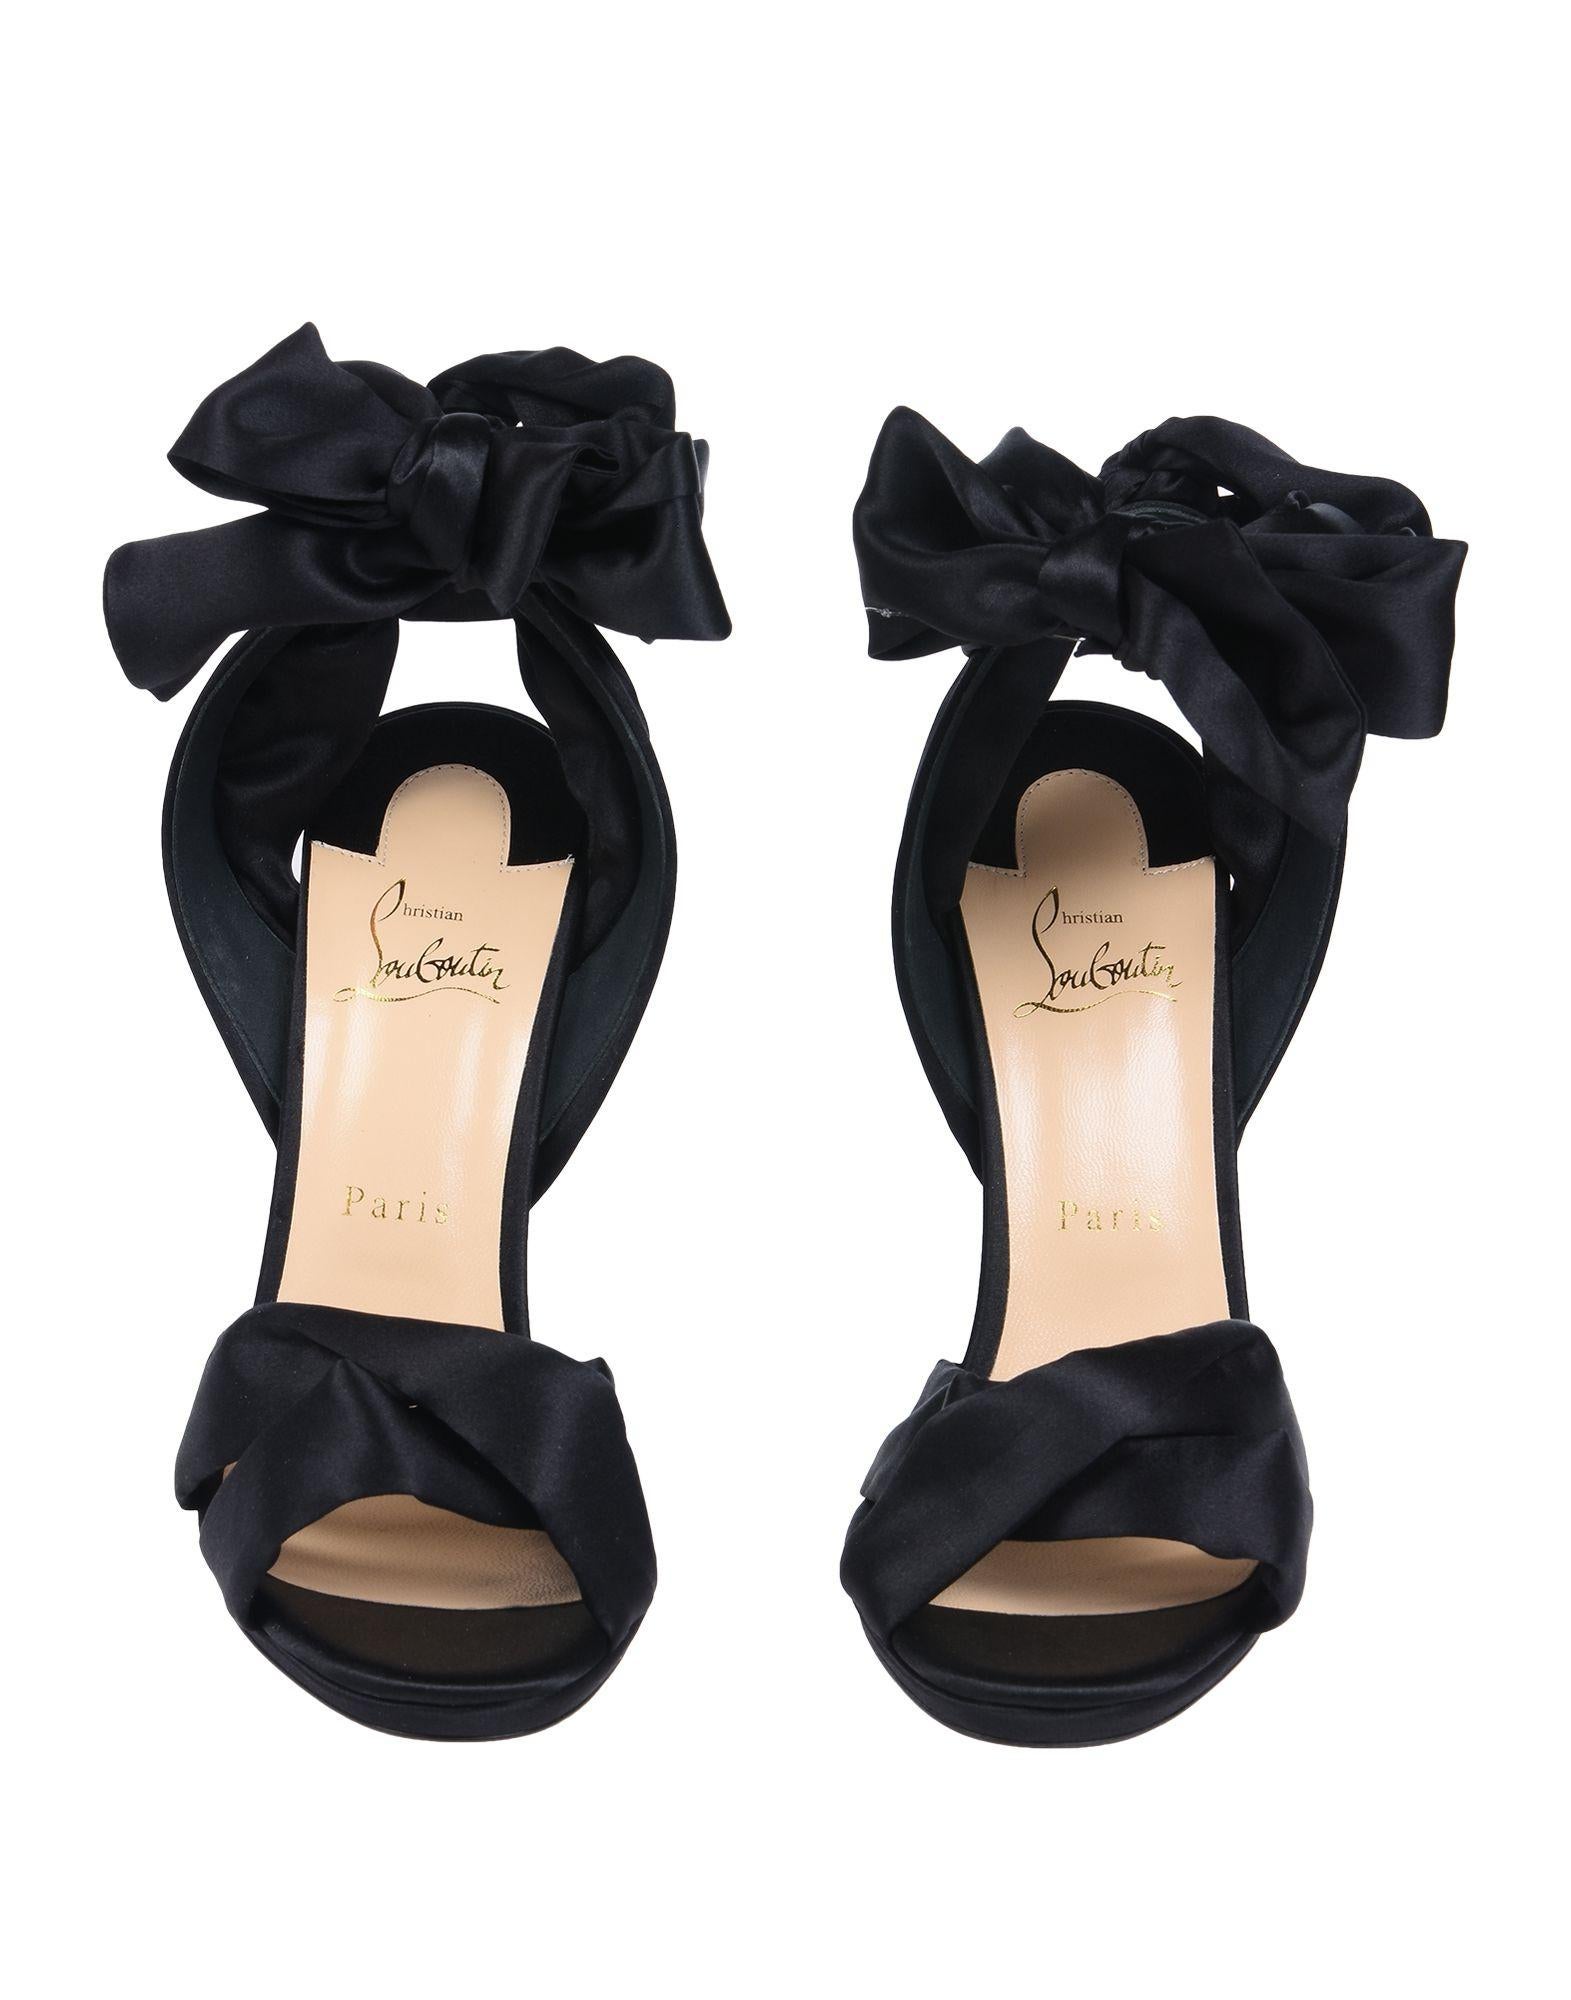 Christian Louboutin NEW Black Satin Bow Evening Sandals Pumps Heels in Box

Size IT 36
Satin
Ankle tie closure
Made in Italy
Heel height 4.75